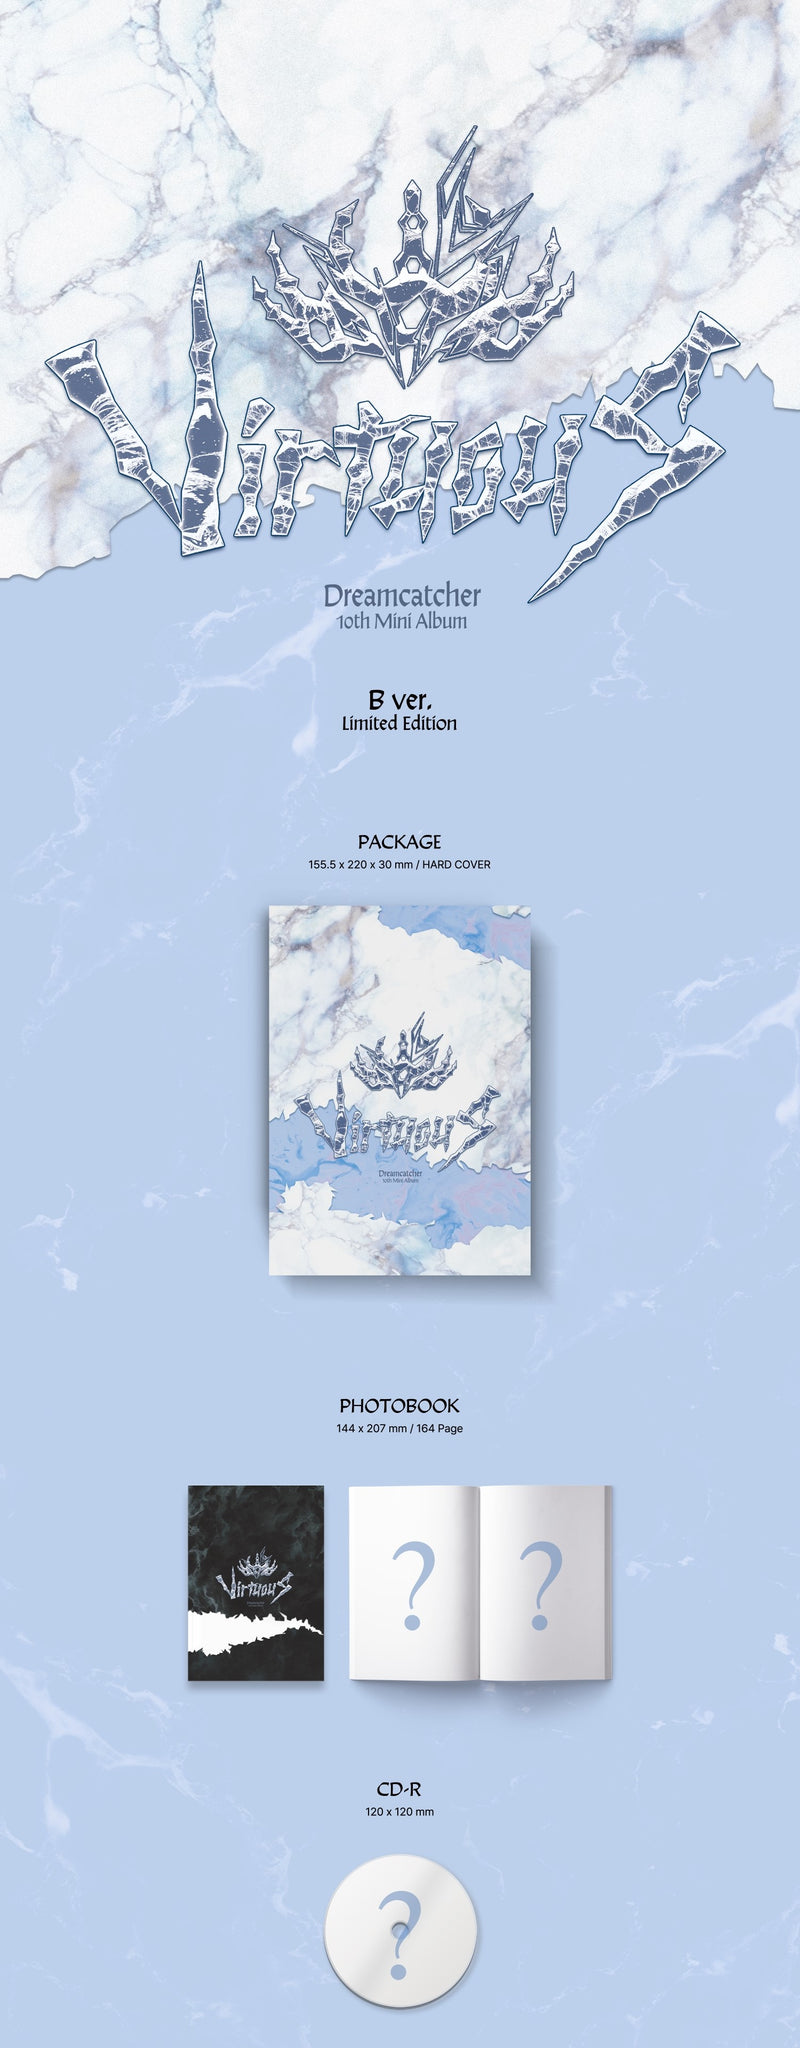 Dreamcatcher 10th Mini Album VirtuouS (Limited Edition) Inclusions: Package, Photobook, CD